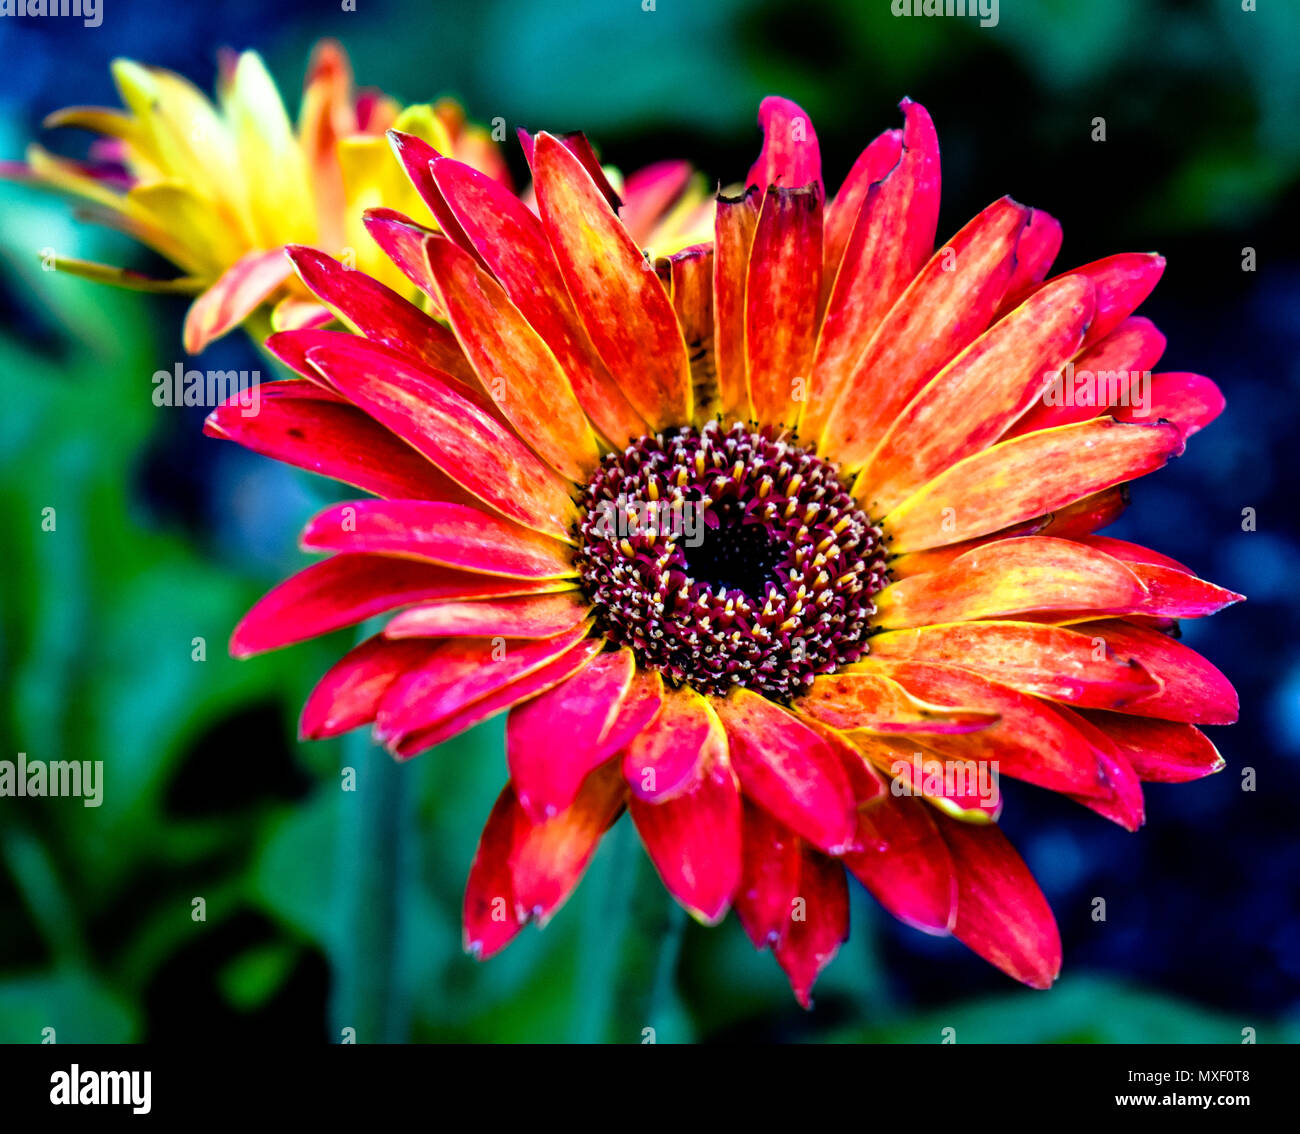 this flower has the beautiful colors of a hot summer sunset Stock Photo